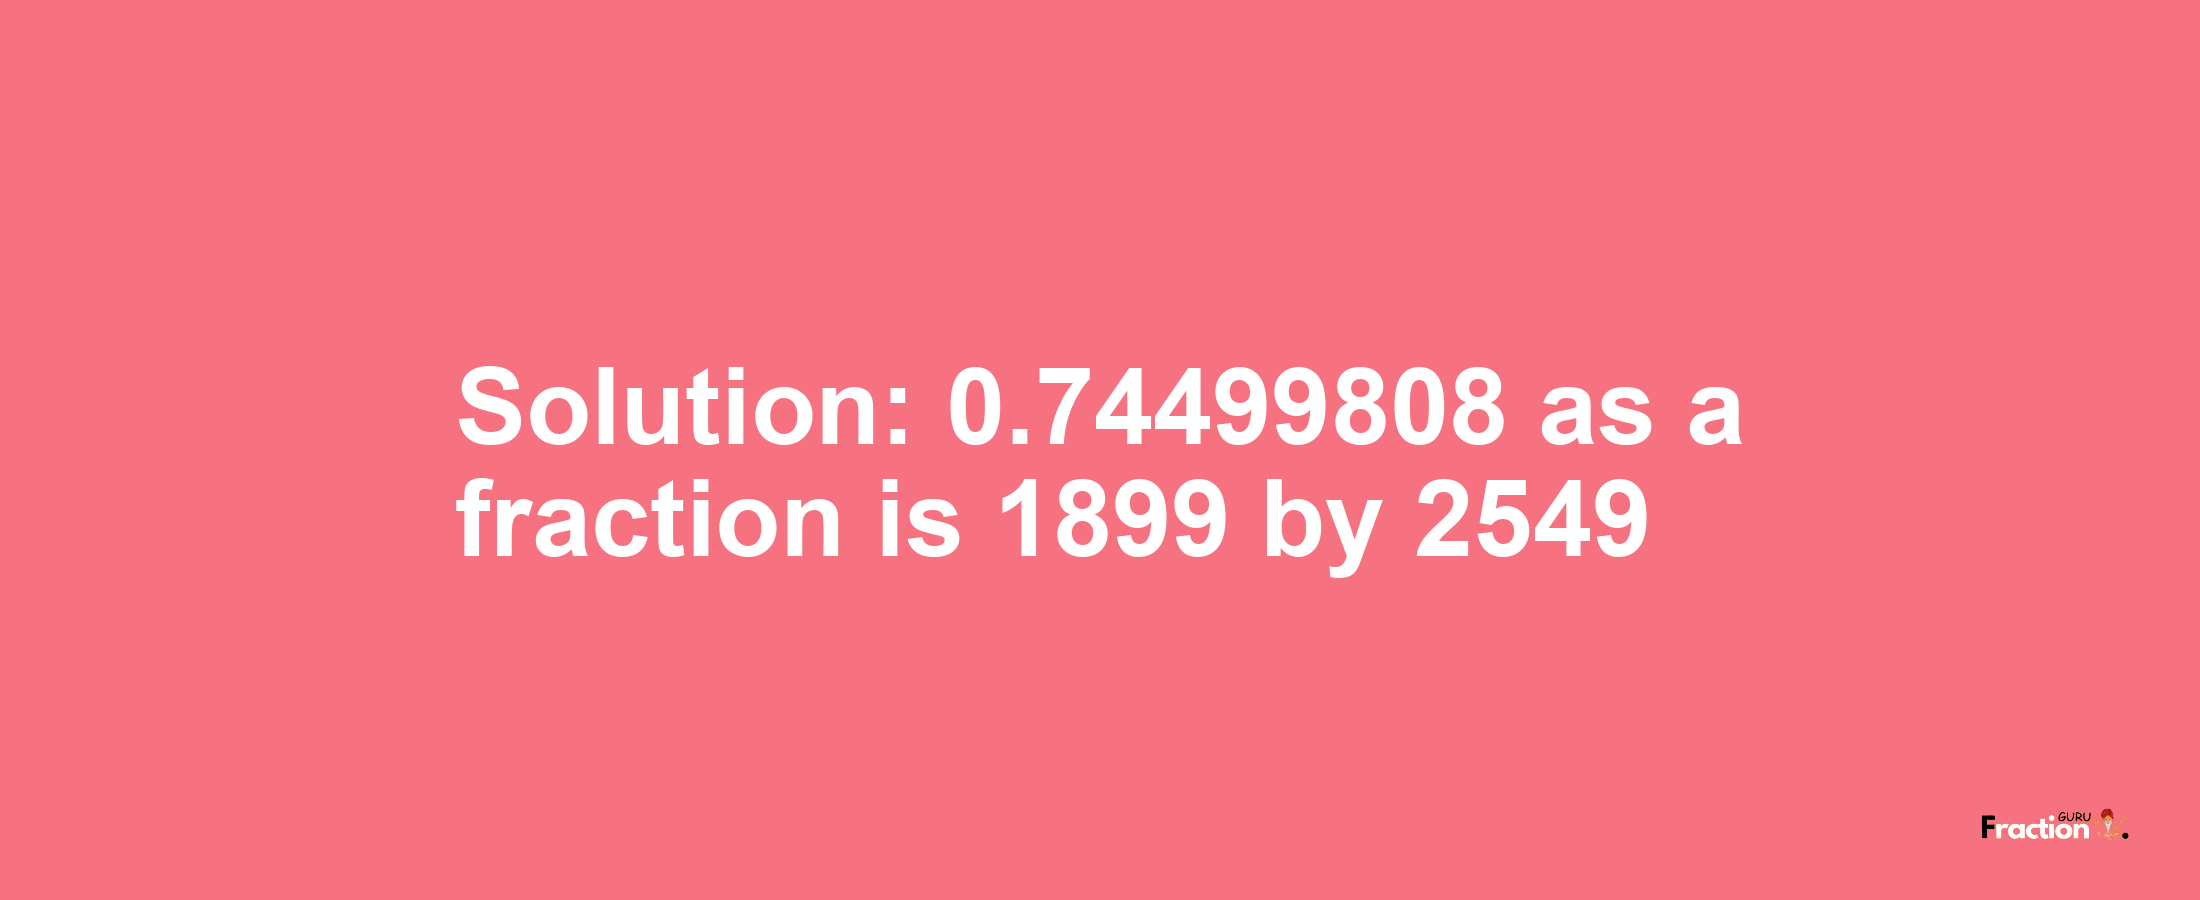 Solution:0.74499808 as a fraction is 1899/2549